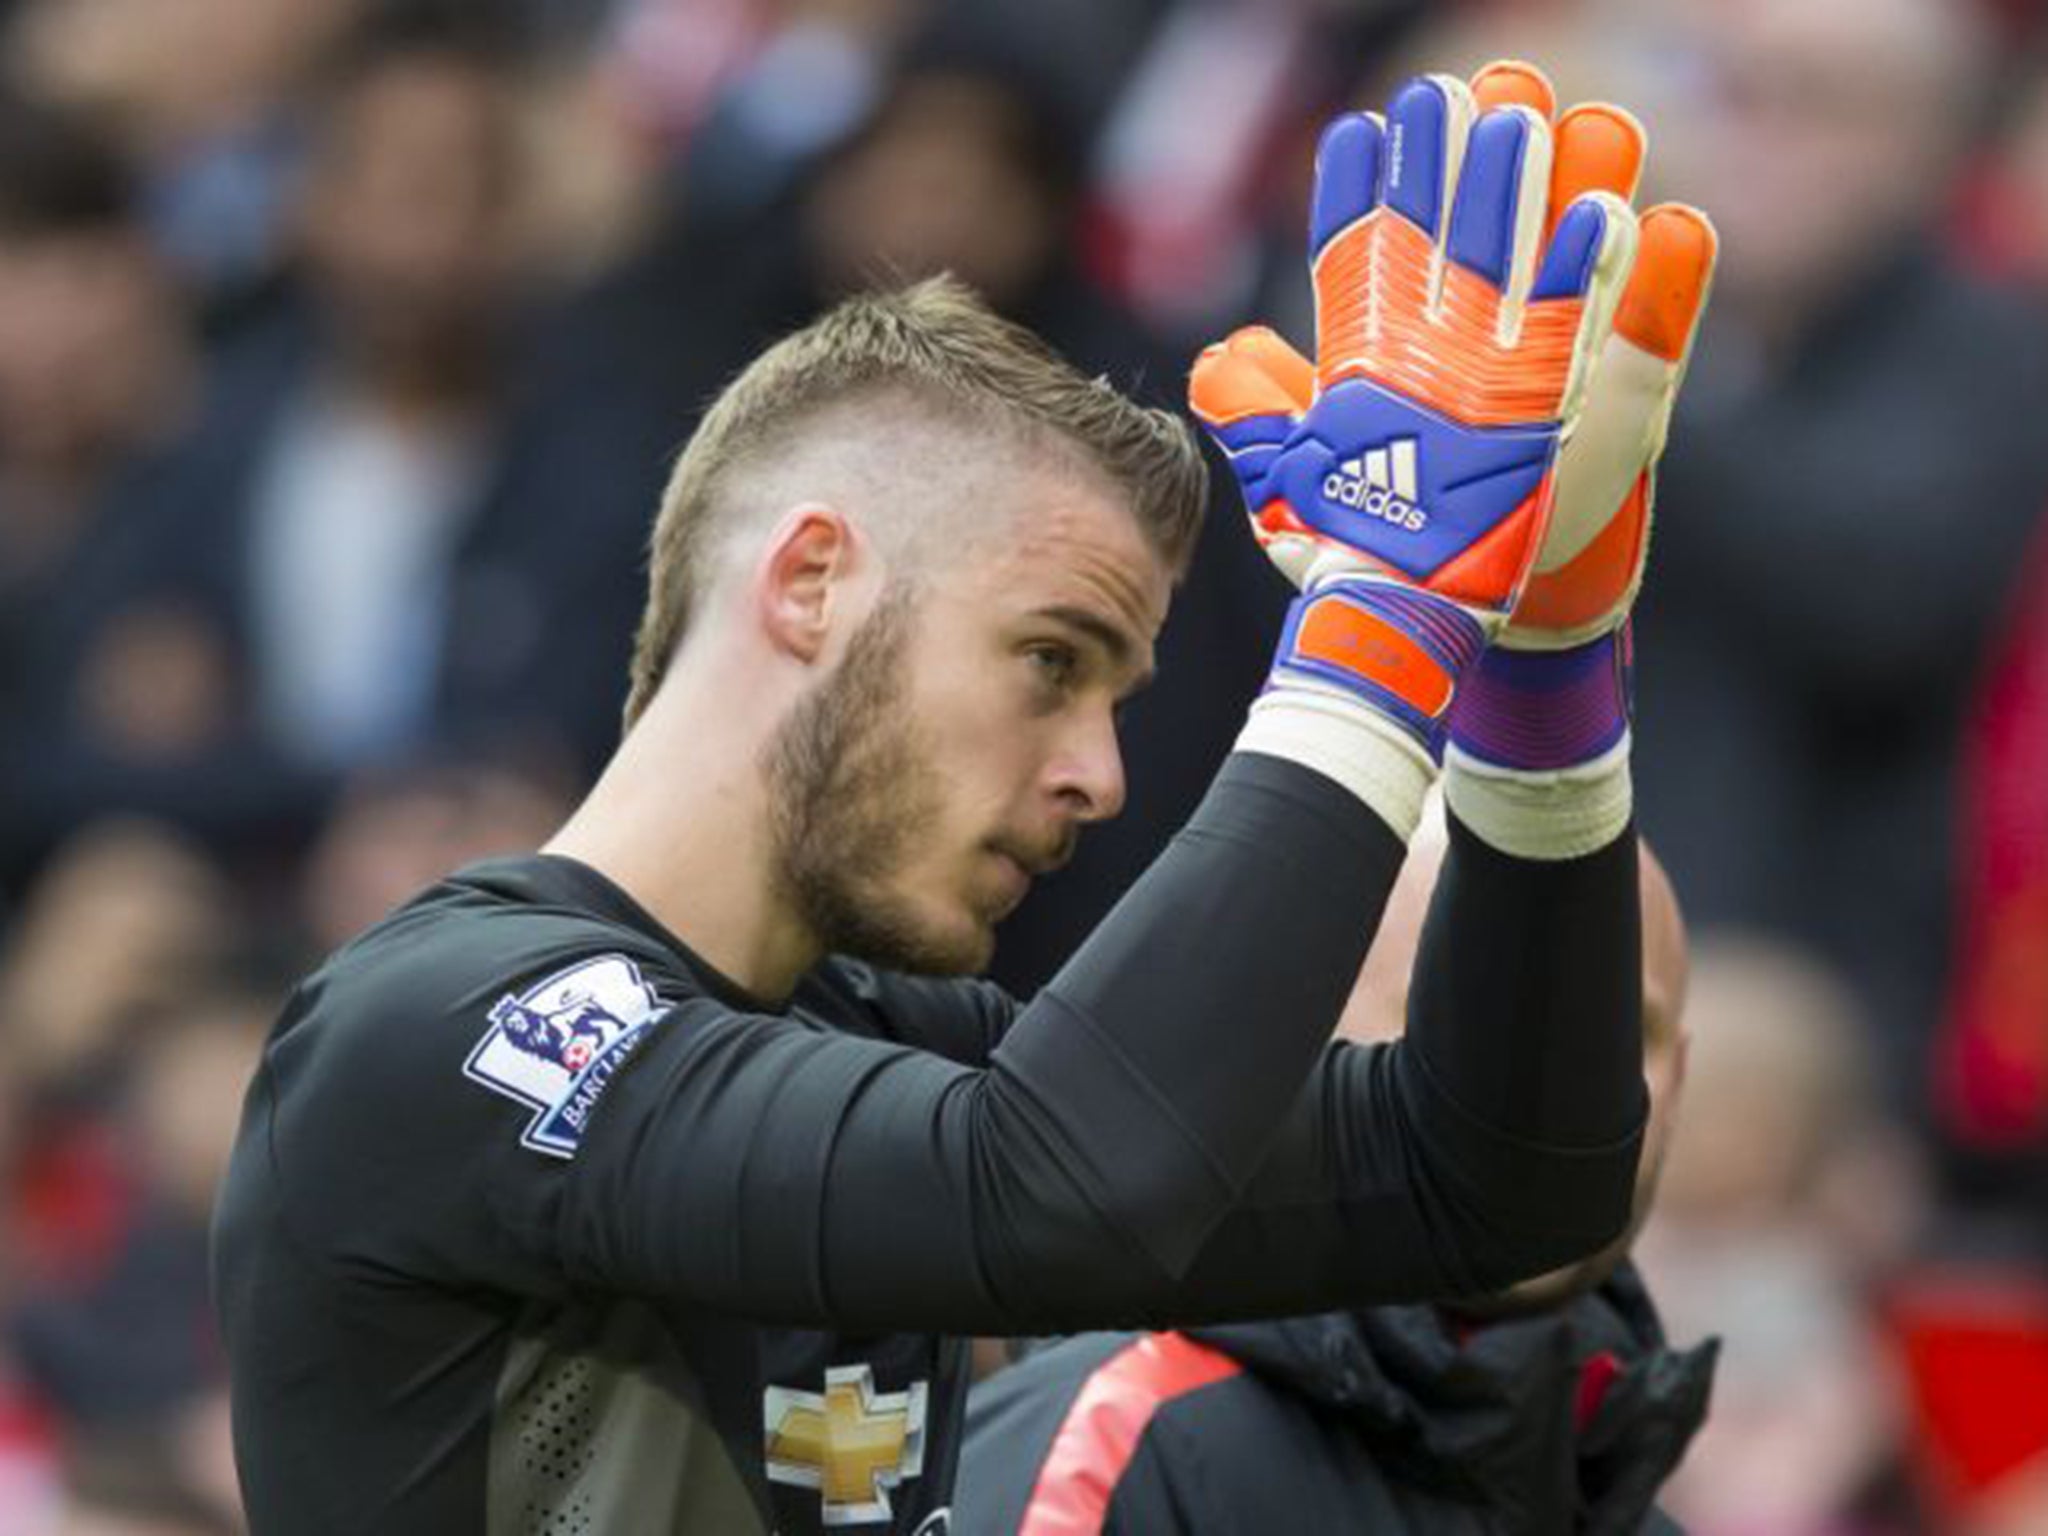 David De Gea applauds the United fans as he is taken off against Arsenal at Old Trafford on Sunday